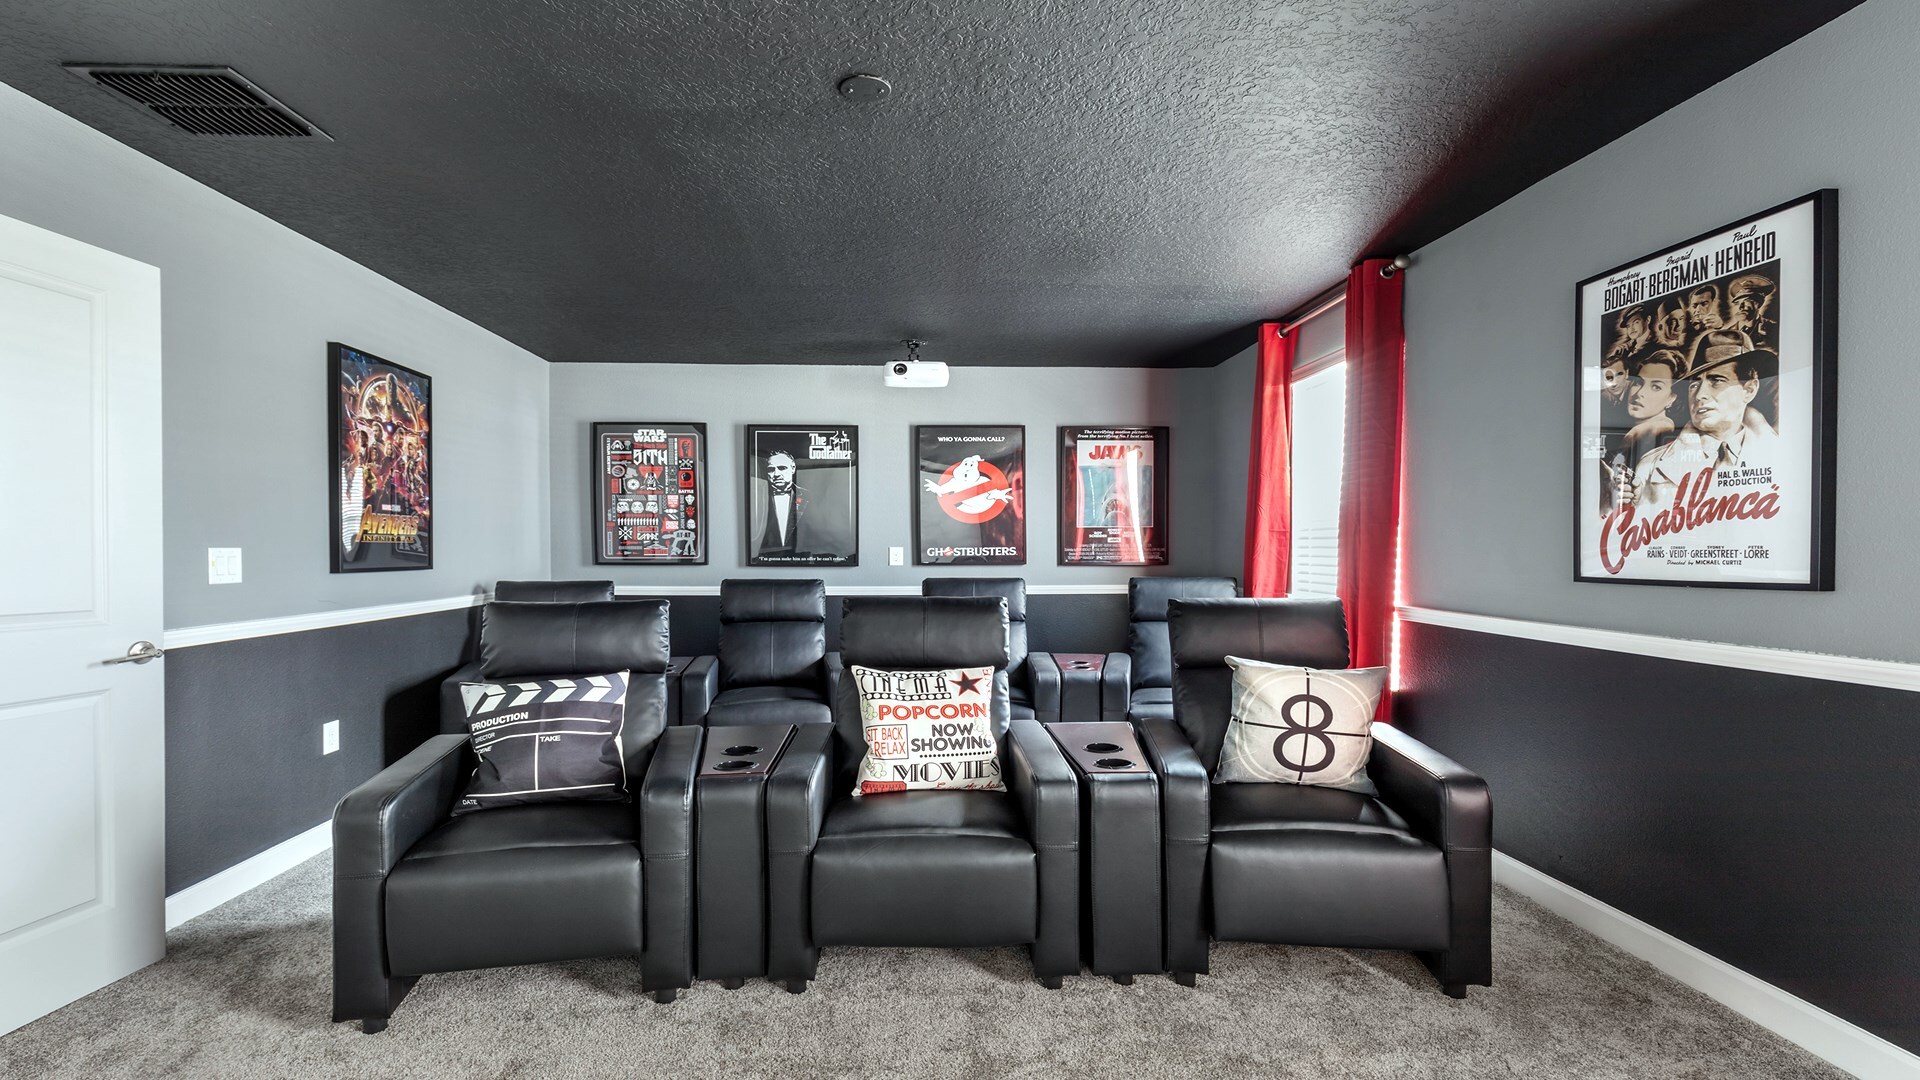 Spacious theater room offers you the best private movie experience with your family and friends.